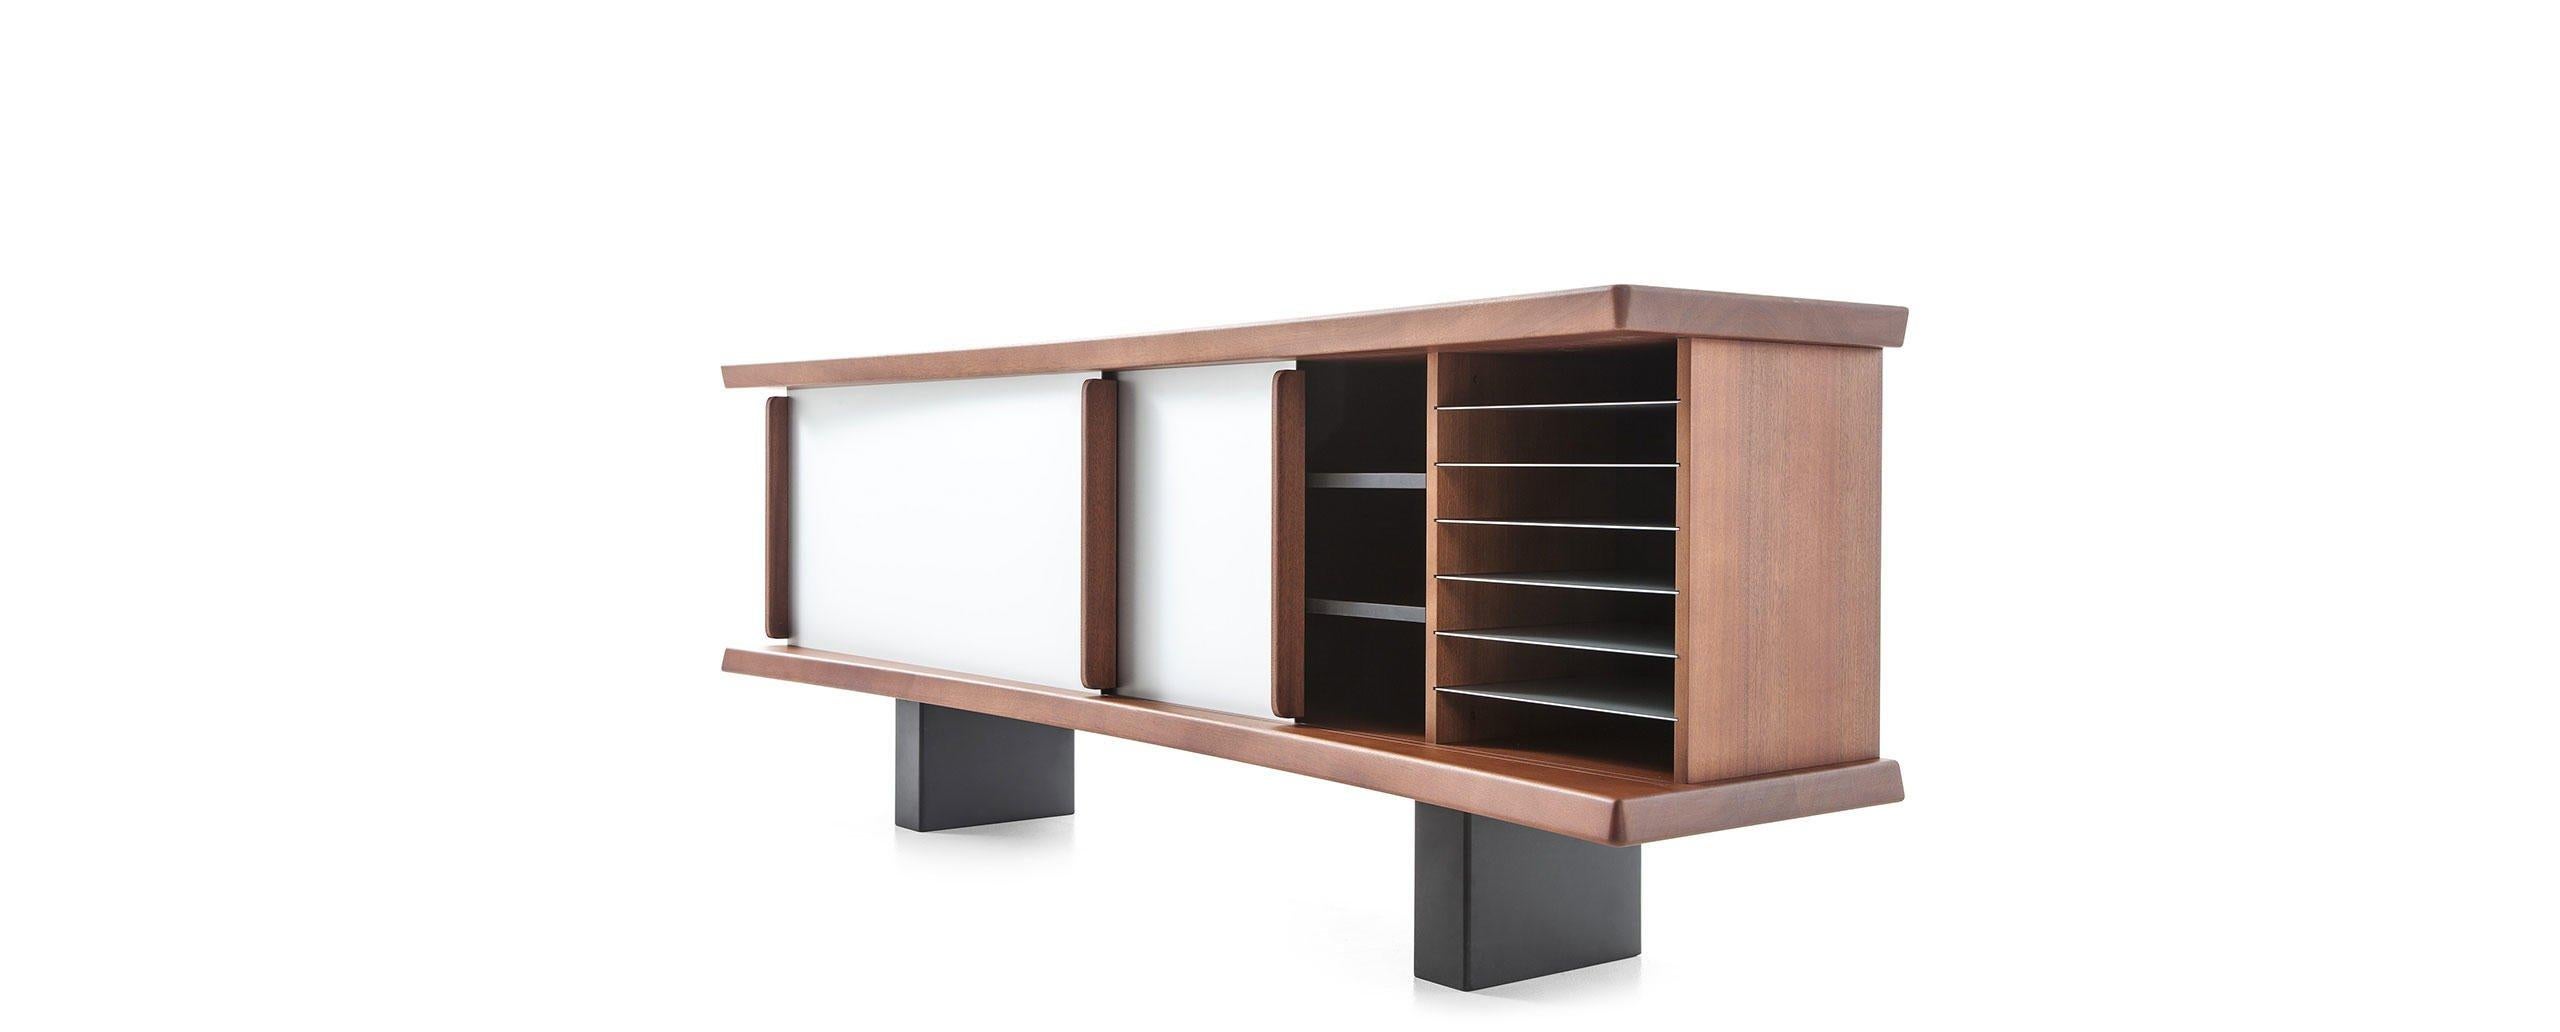 Italian Charlotte Perriand 513 Riflesso Storage Unit by Cassina For Sale